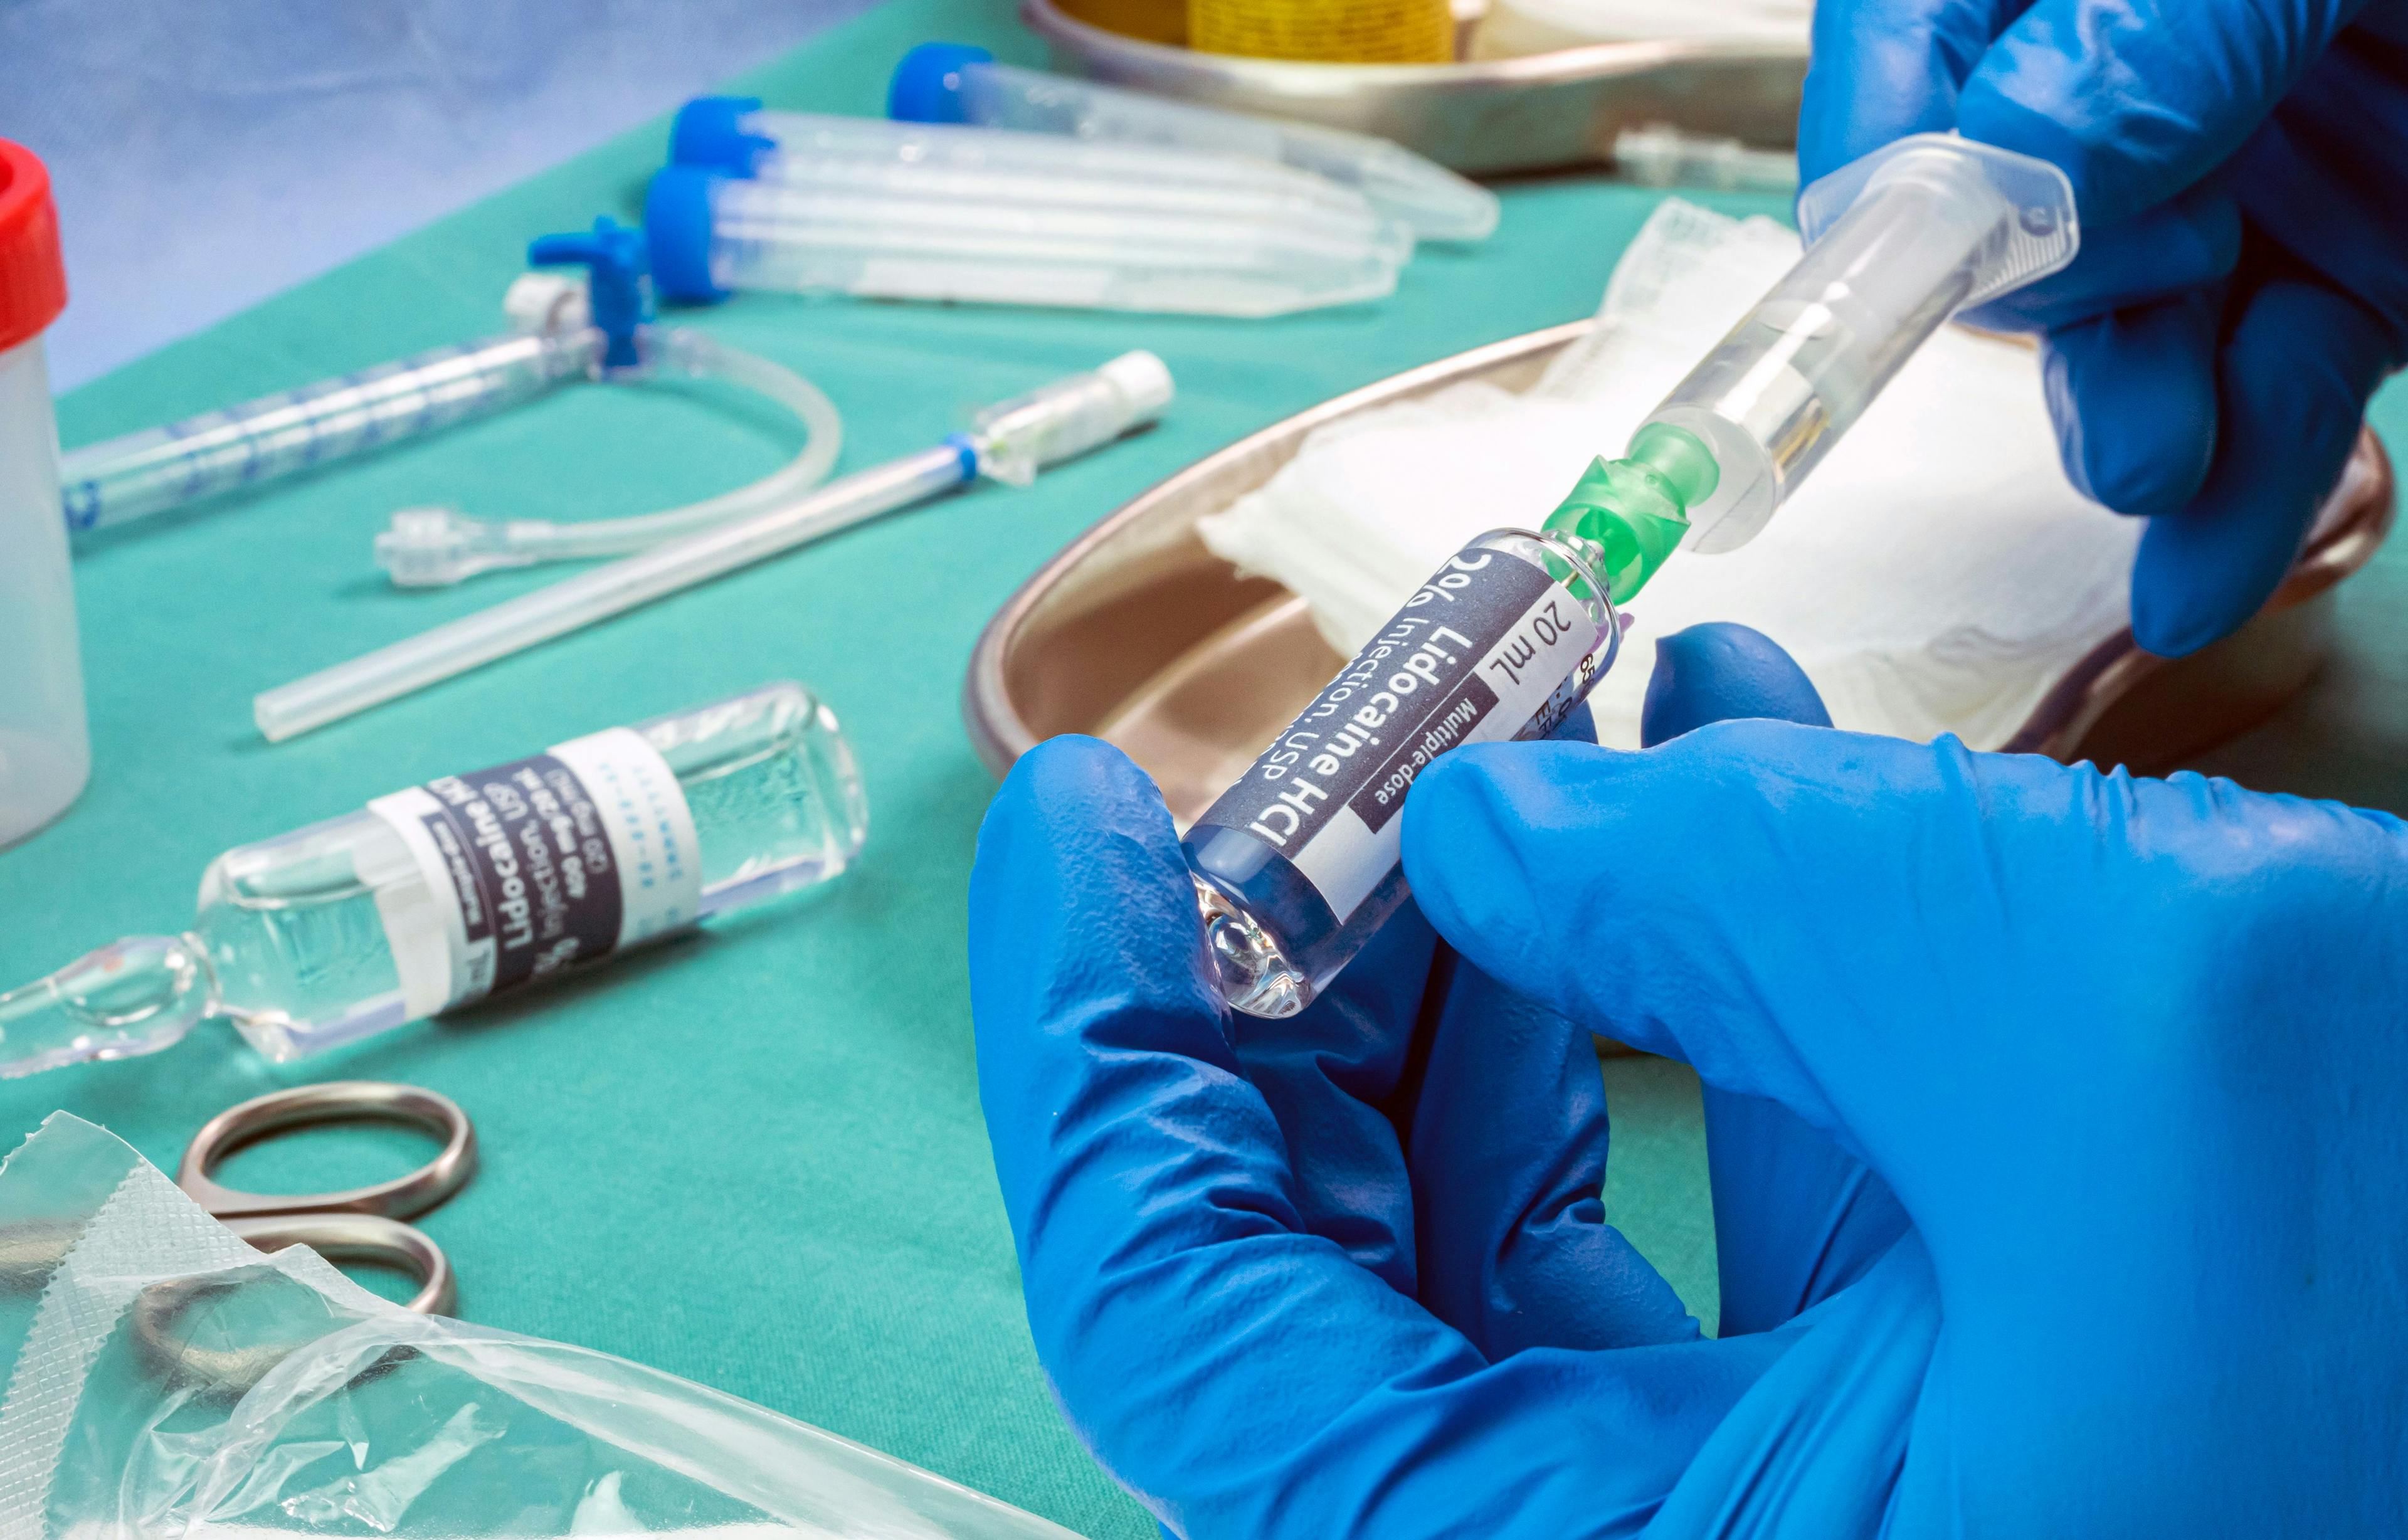 Nurse holds ampoule of anesthesia, preparation to extract cerebrospinal fluid to investigate causes in a person affected by transverse myelitis who was injected with experimental Oxford phase three | Image Credit: © Felipe Caparrós - stock.adobe.com